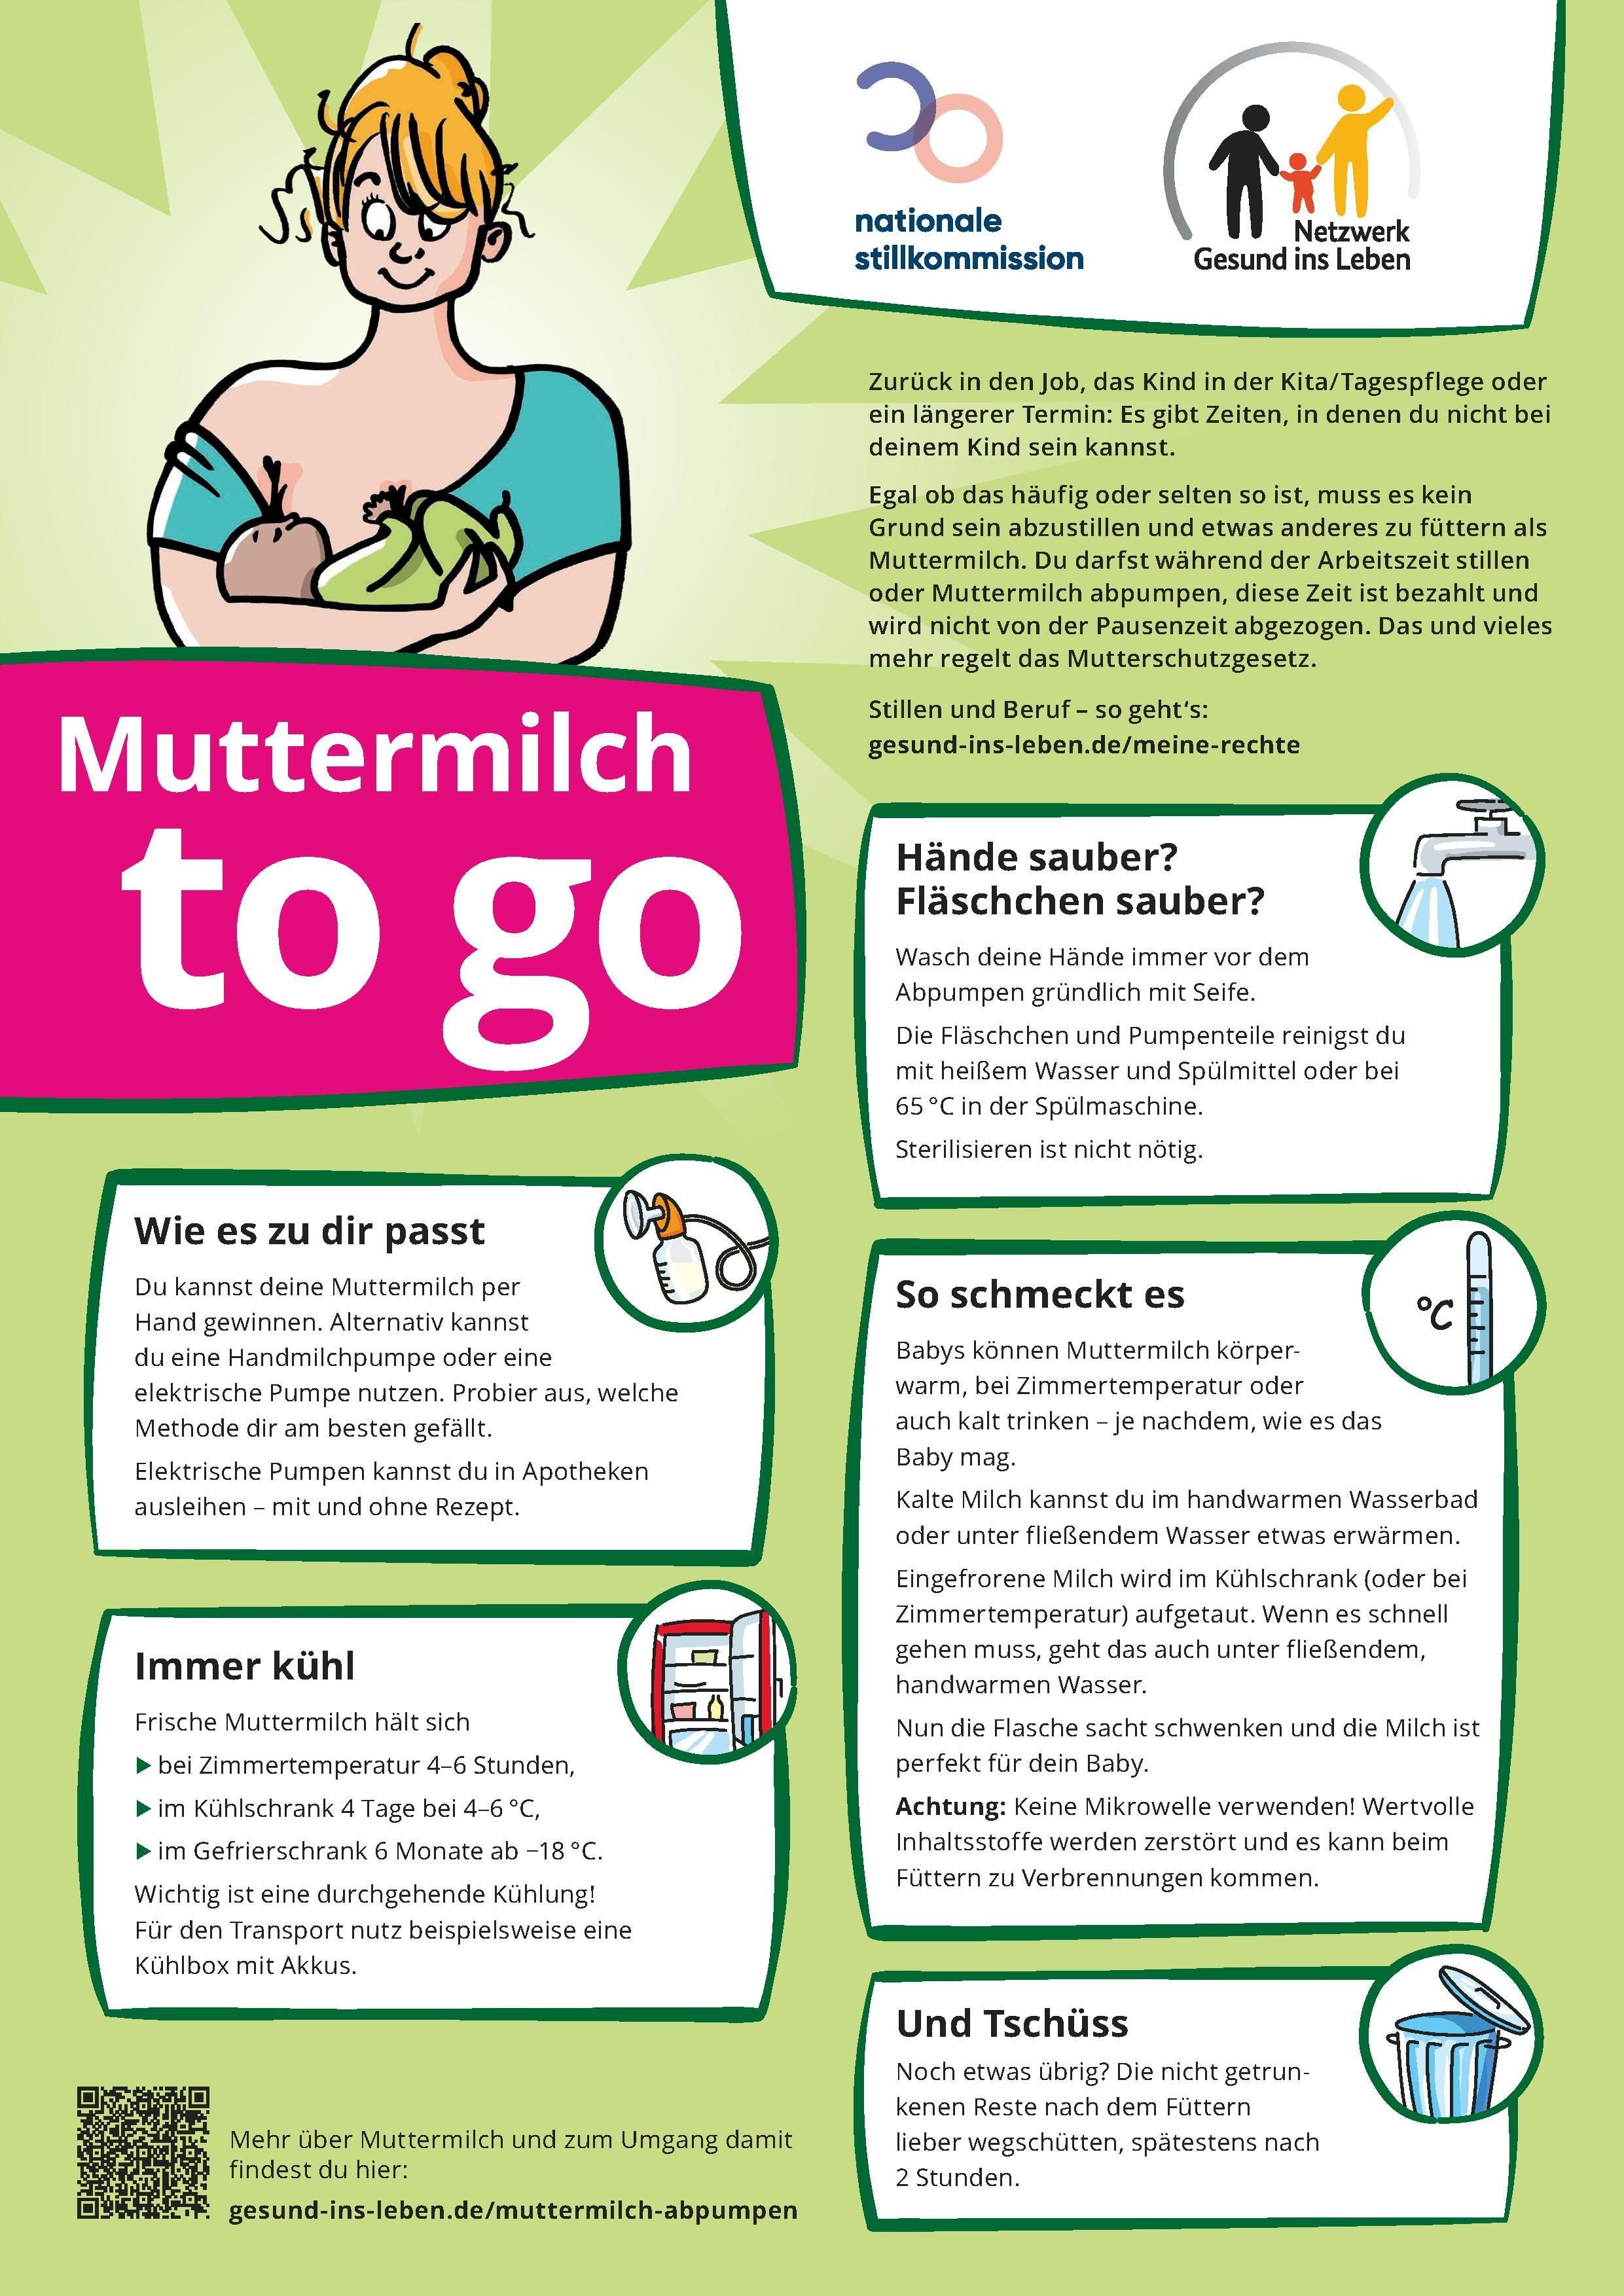 Muttermilch to go